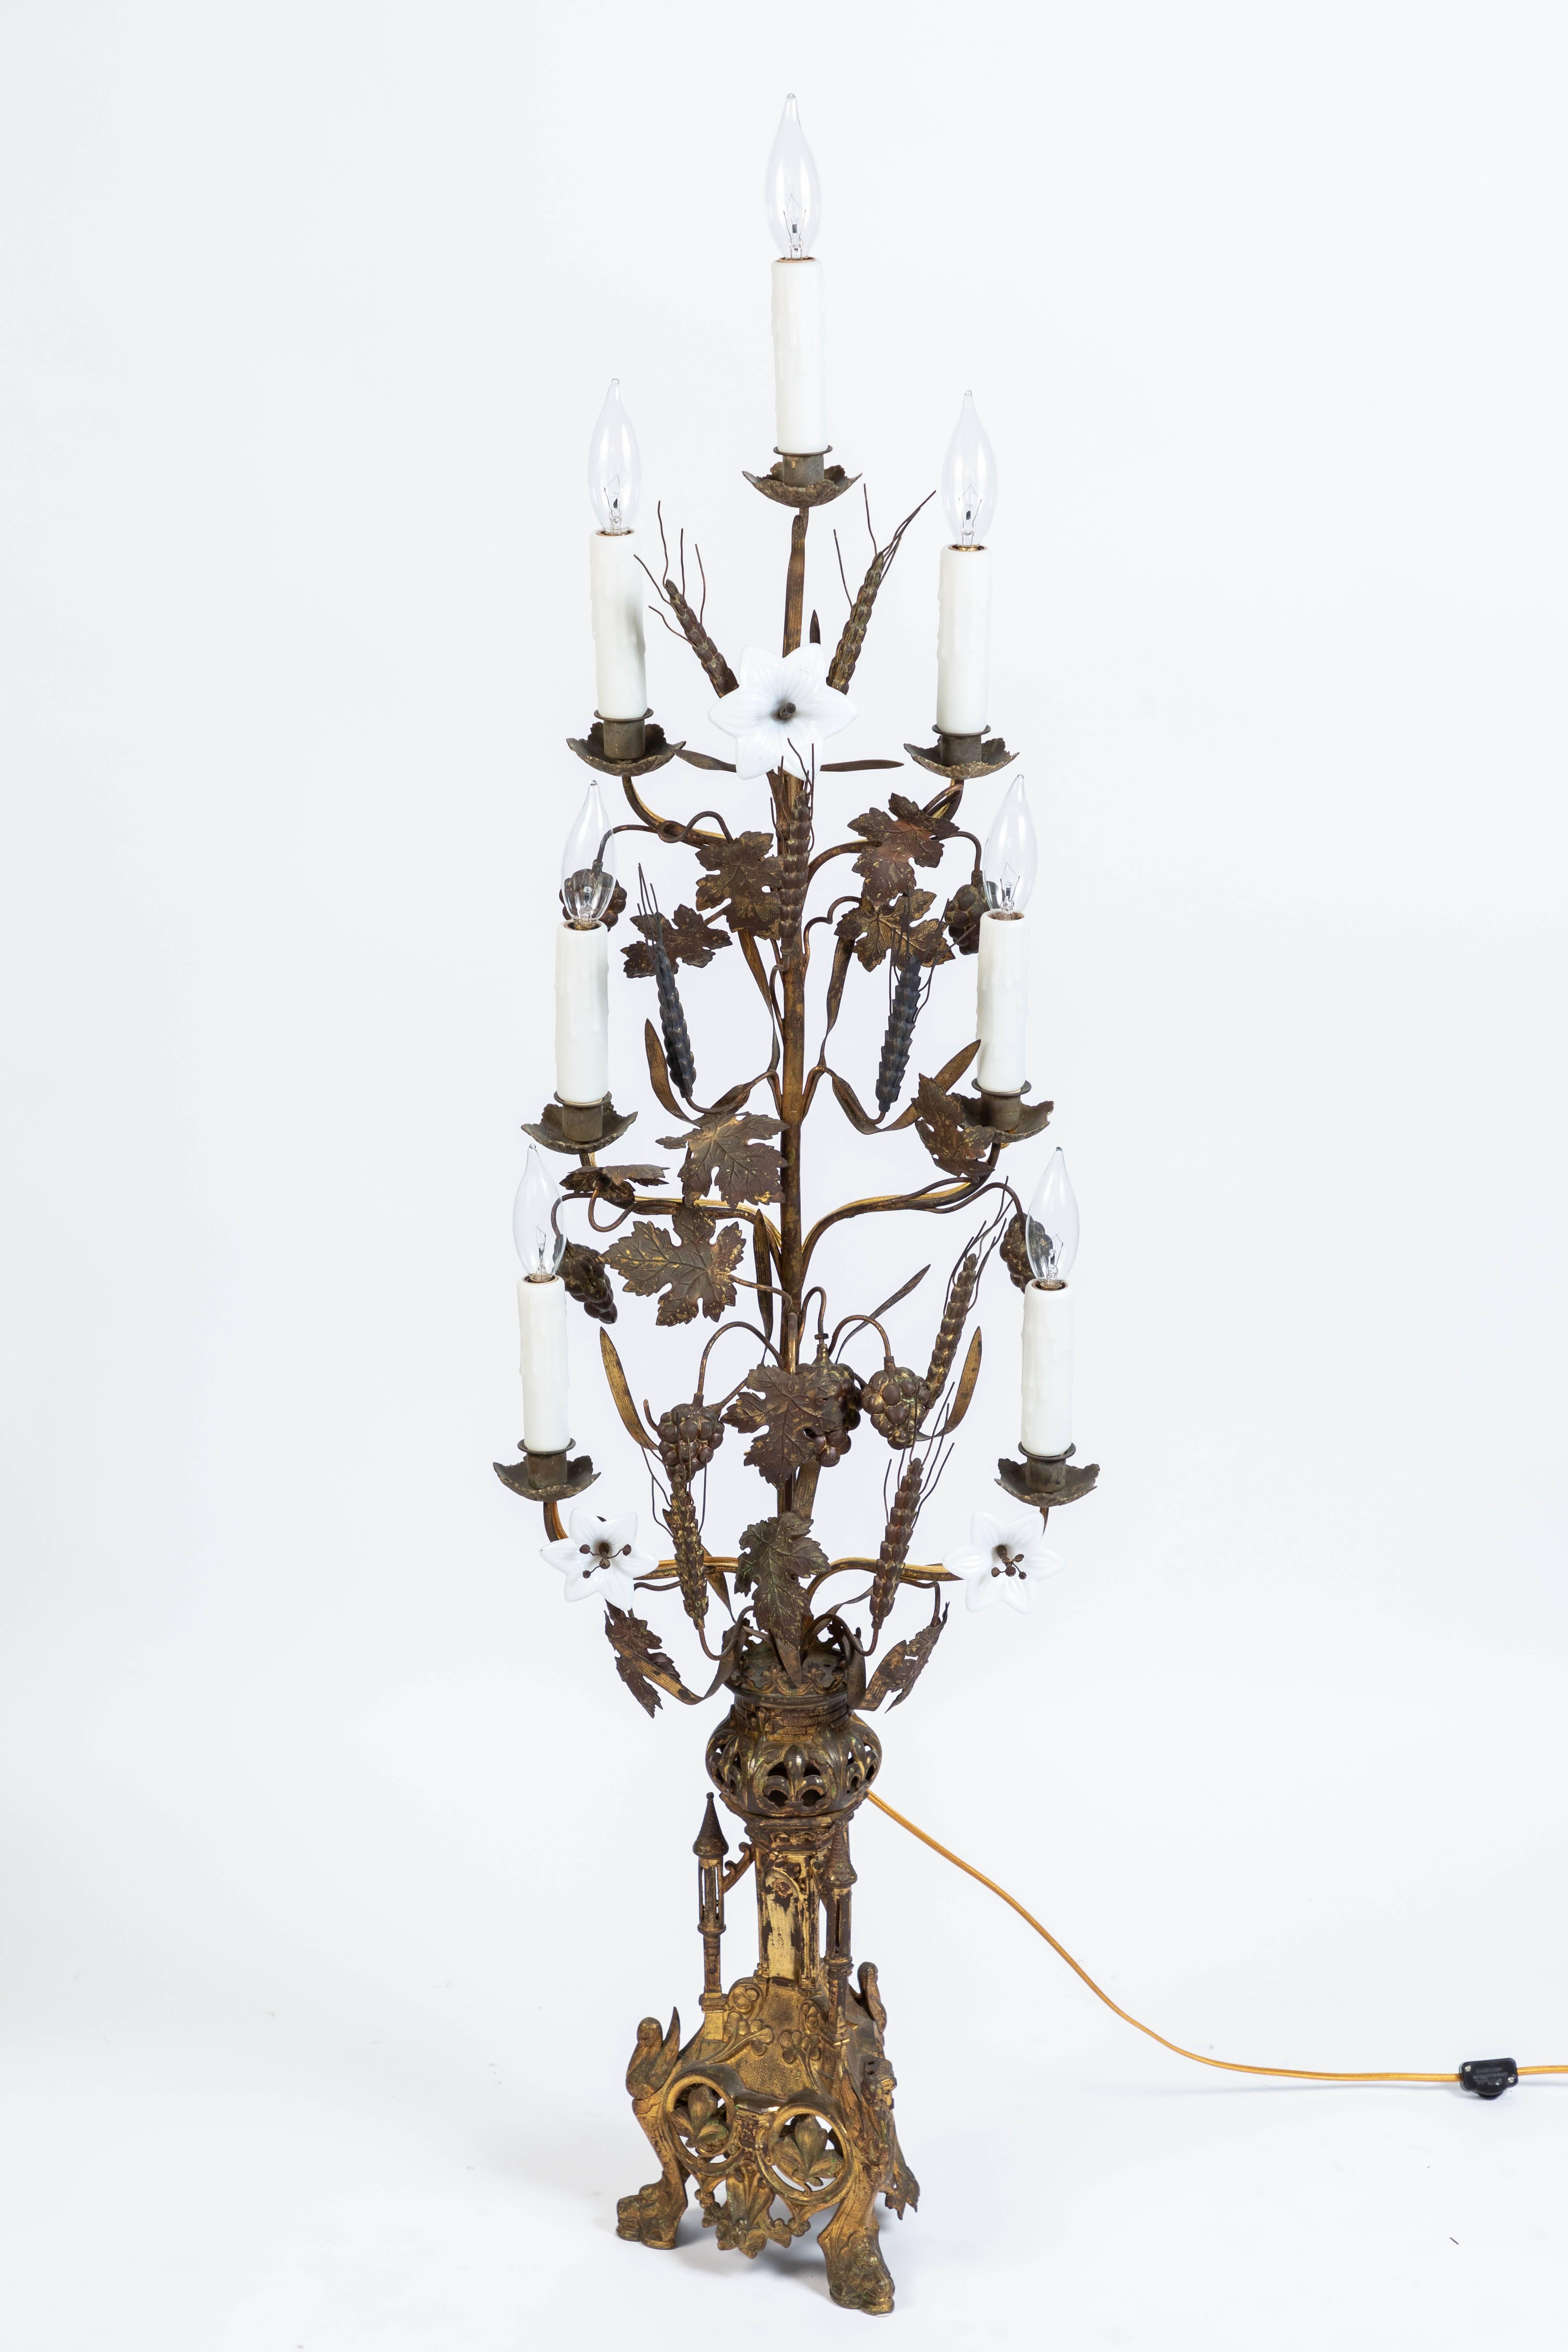 19th century impressive ornate antique French gold gilt altar lamp (Seven branch). Features harvest motifs (Wheat and grape bunches), fleur-de-lis, crown, turrets, swans, three white opaline glass lily flower accents and gargoyle heads at the base.